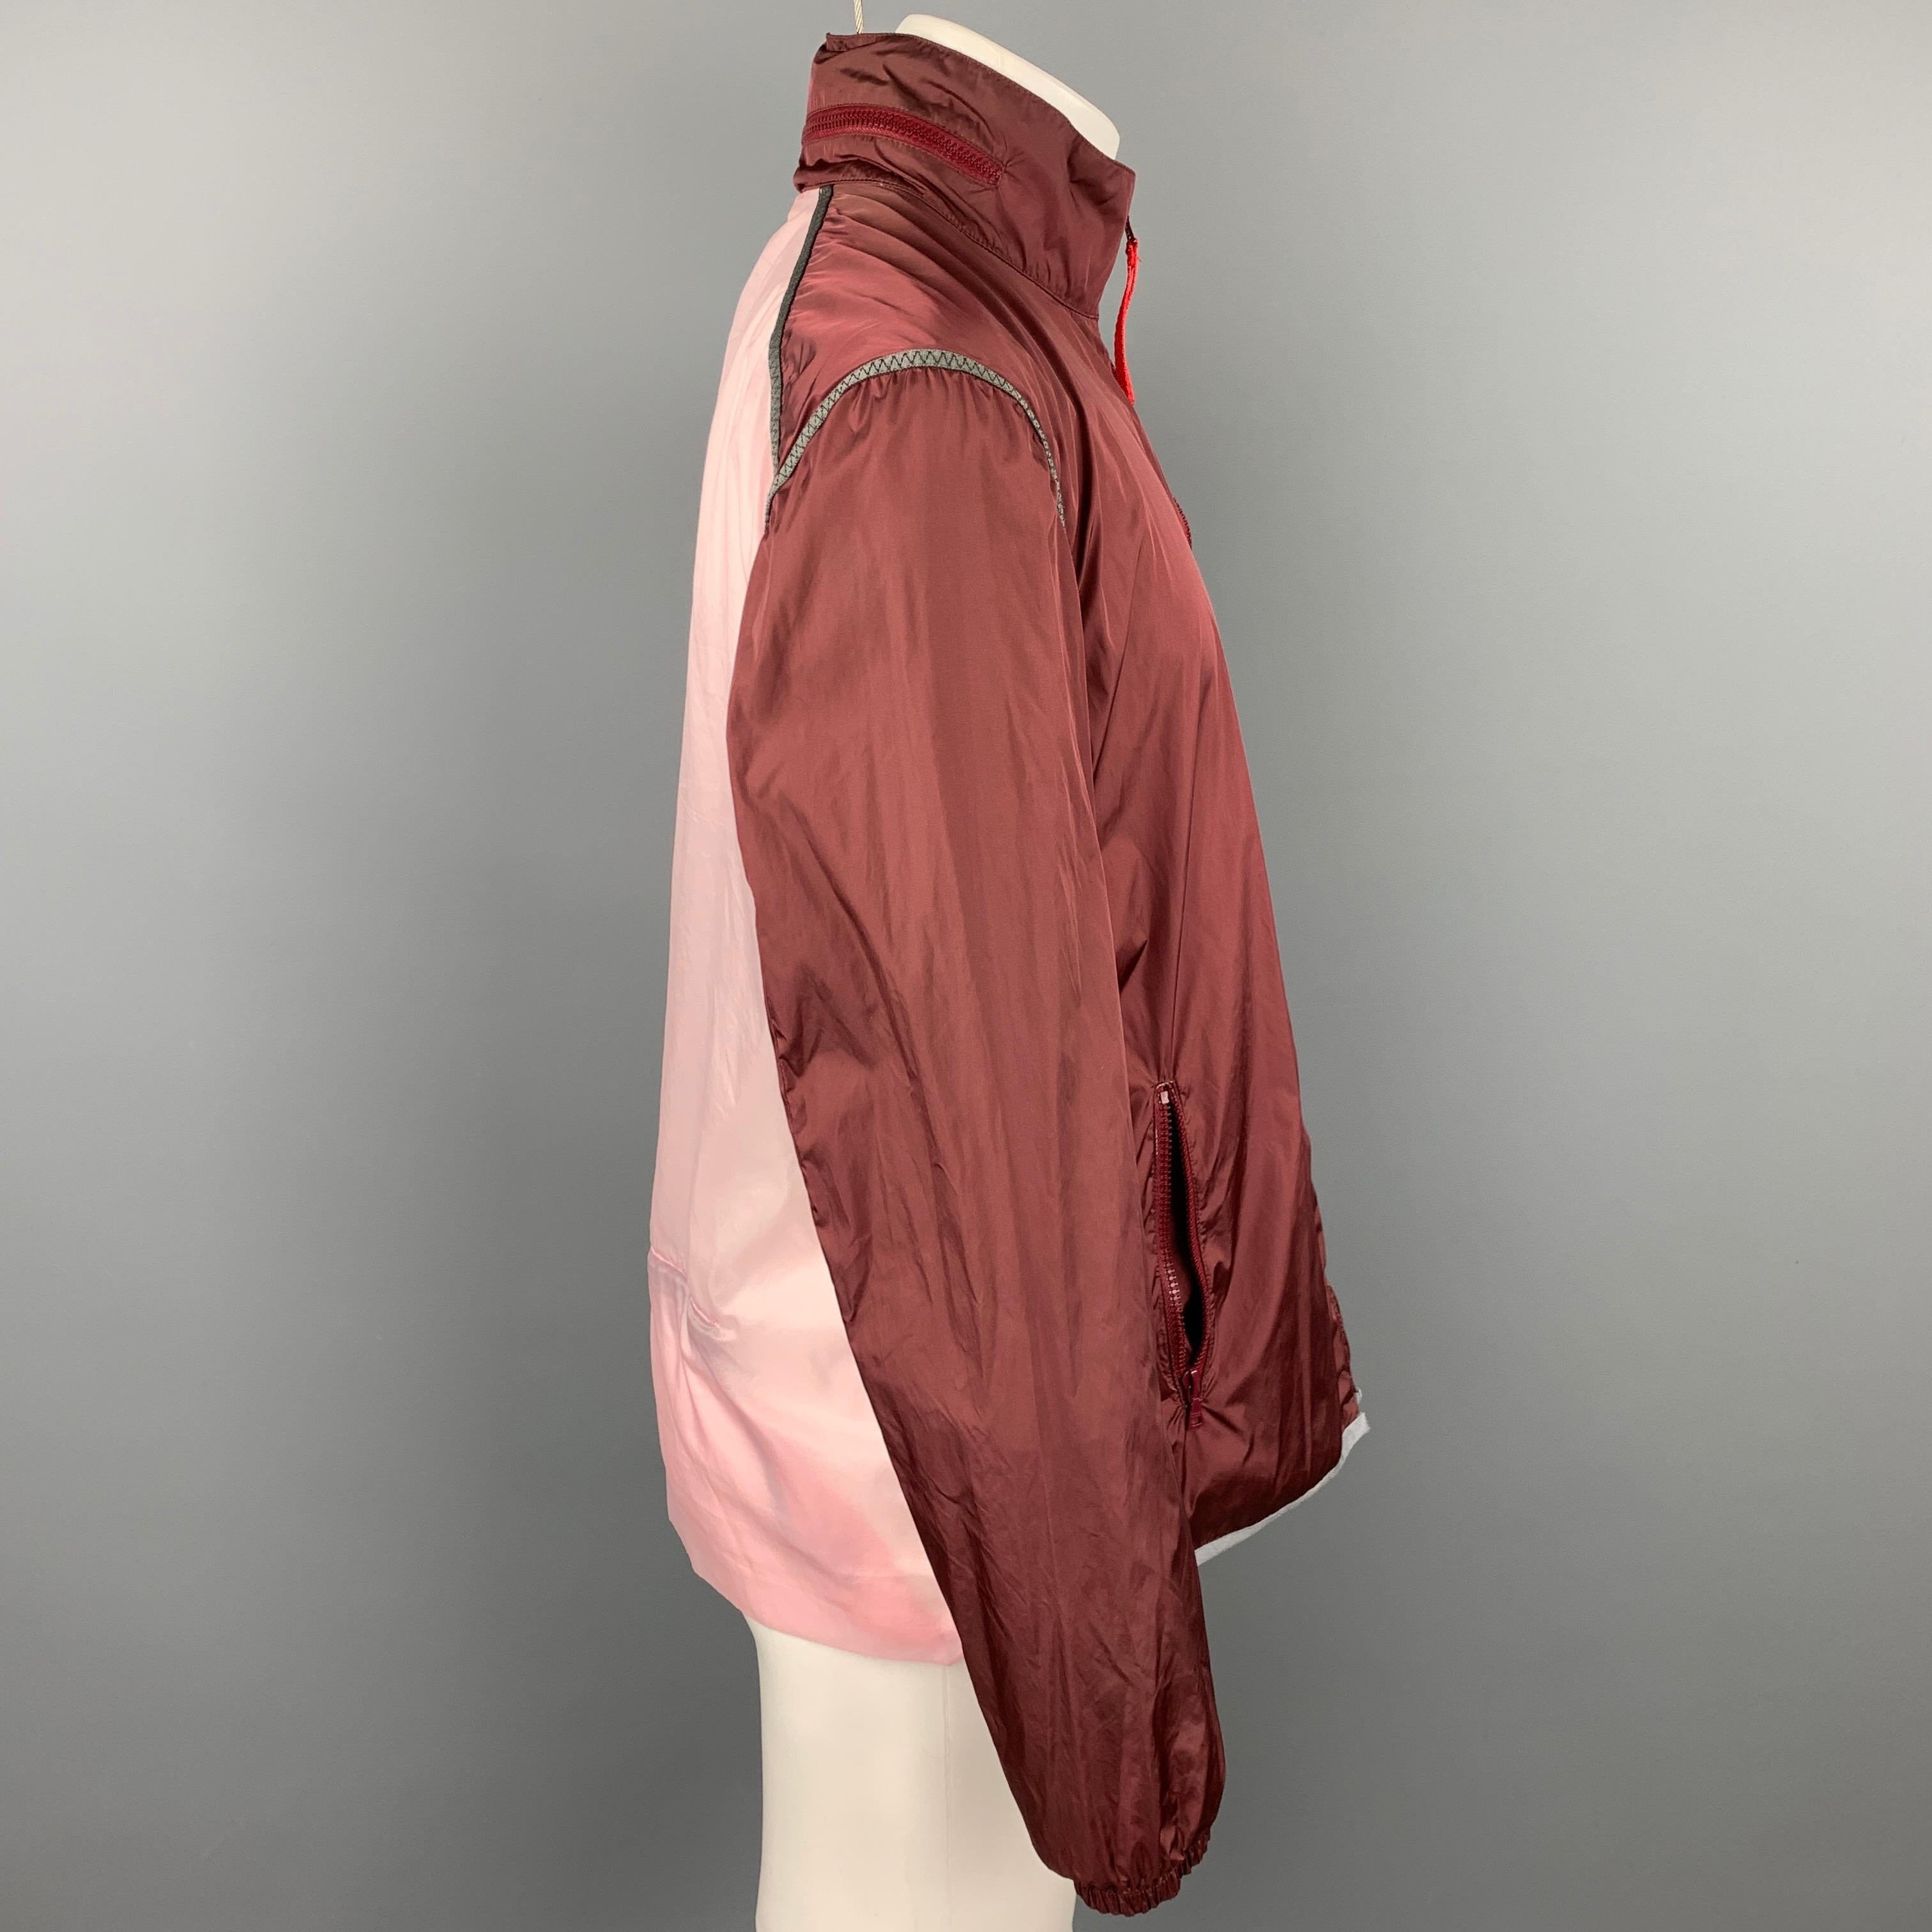 PRADA SPORT jacket comes in a burgundy & pink color block nylon featuring a hooded style, stripe trim, high collar, front pockets, and a full zip up closure. Made in Italy.

Very Good Pre-Owned Condition.
Marked: TG 50

Measurements:

Shoulder: 19